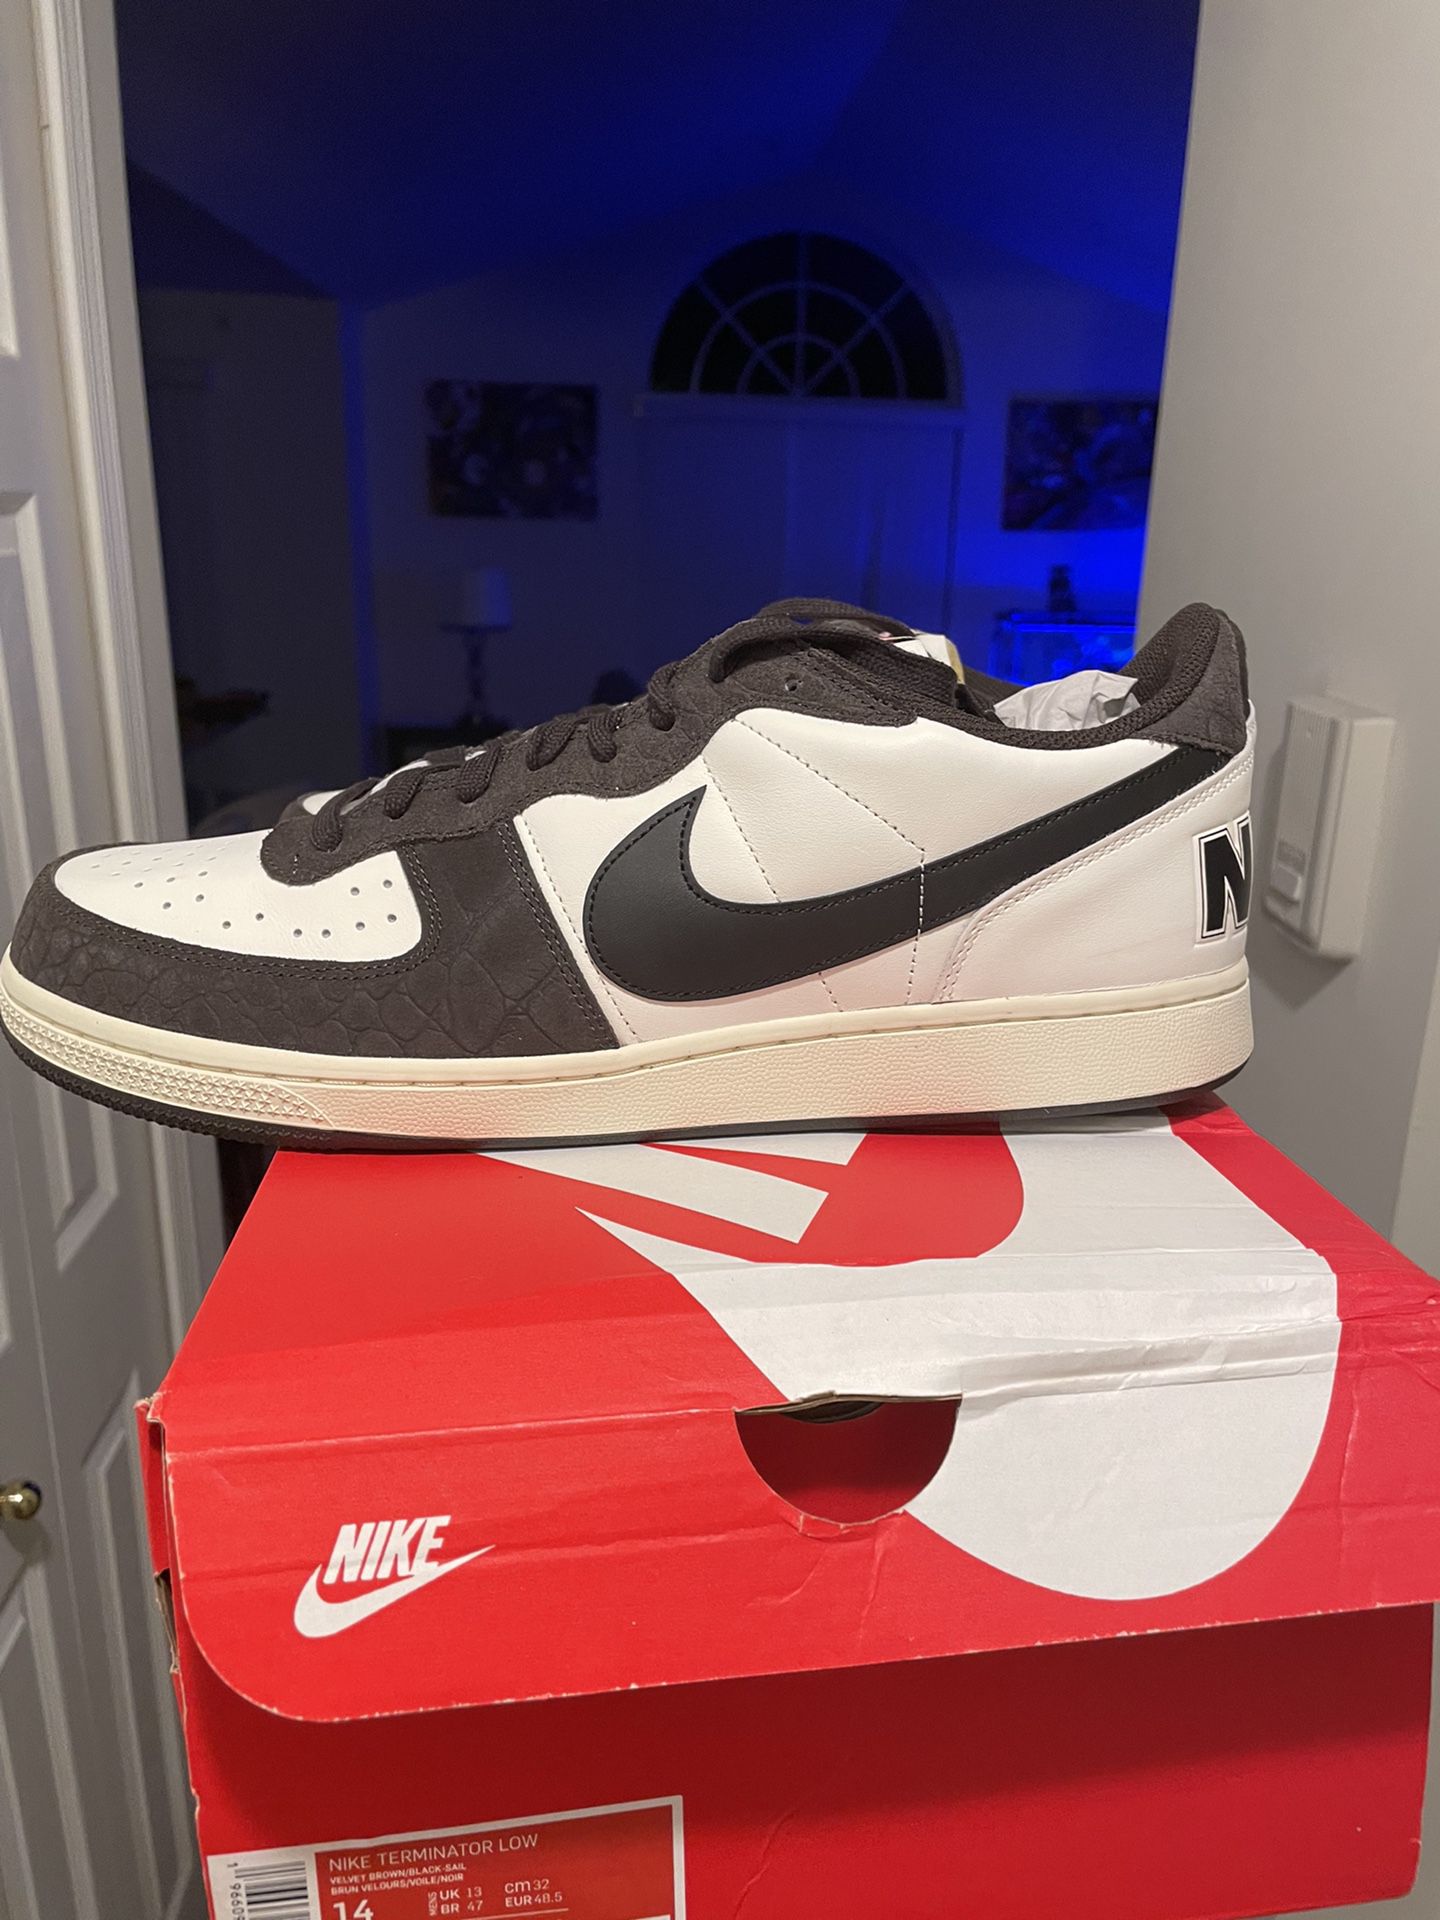 Nike Terminator Low Velvet Brown for Sale in Shelby Township, MI OfferUp